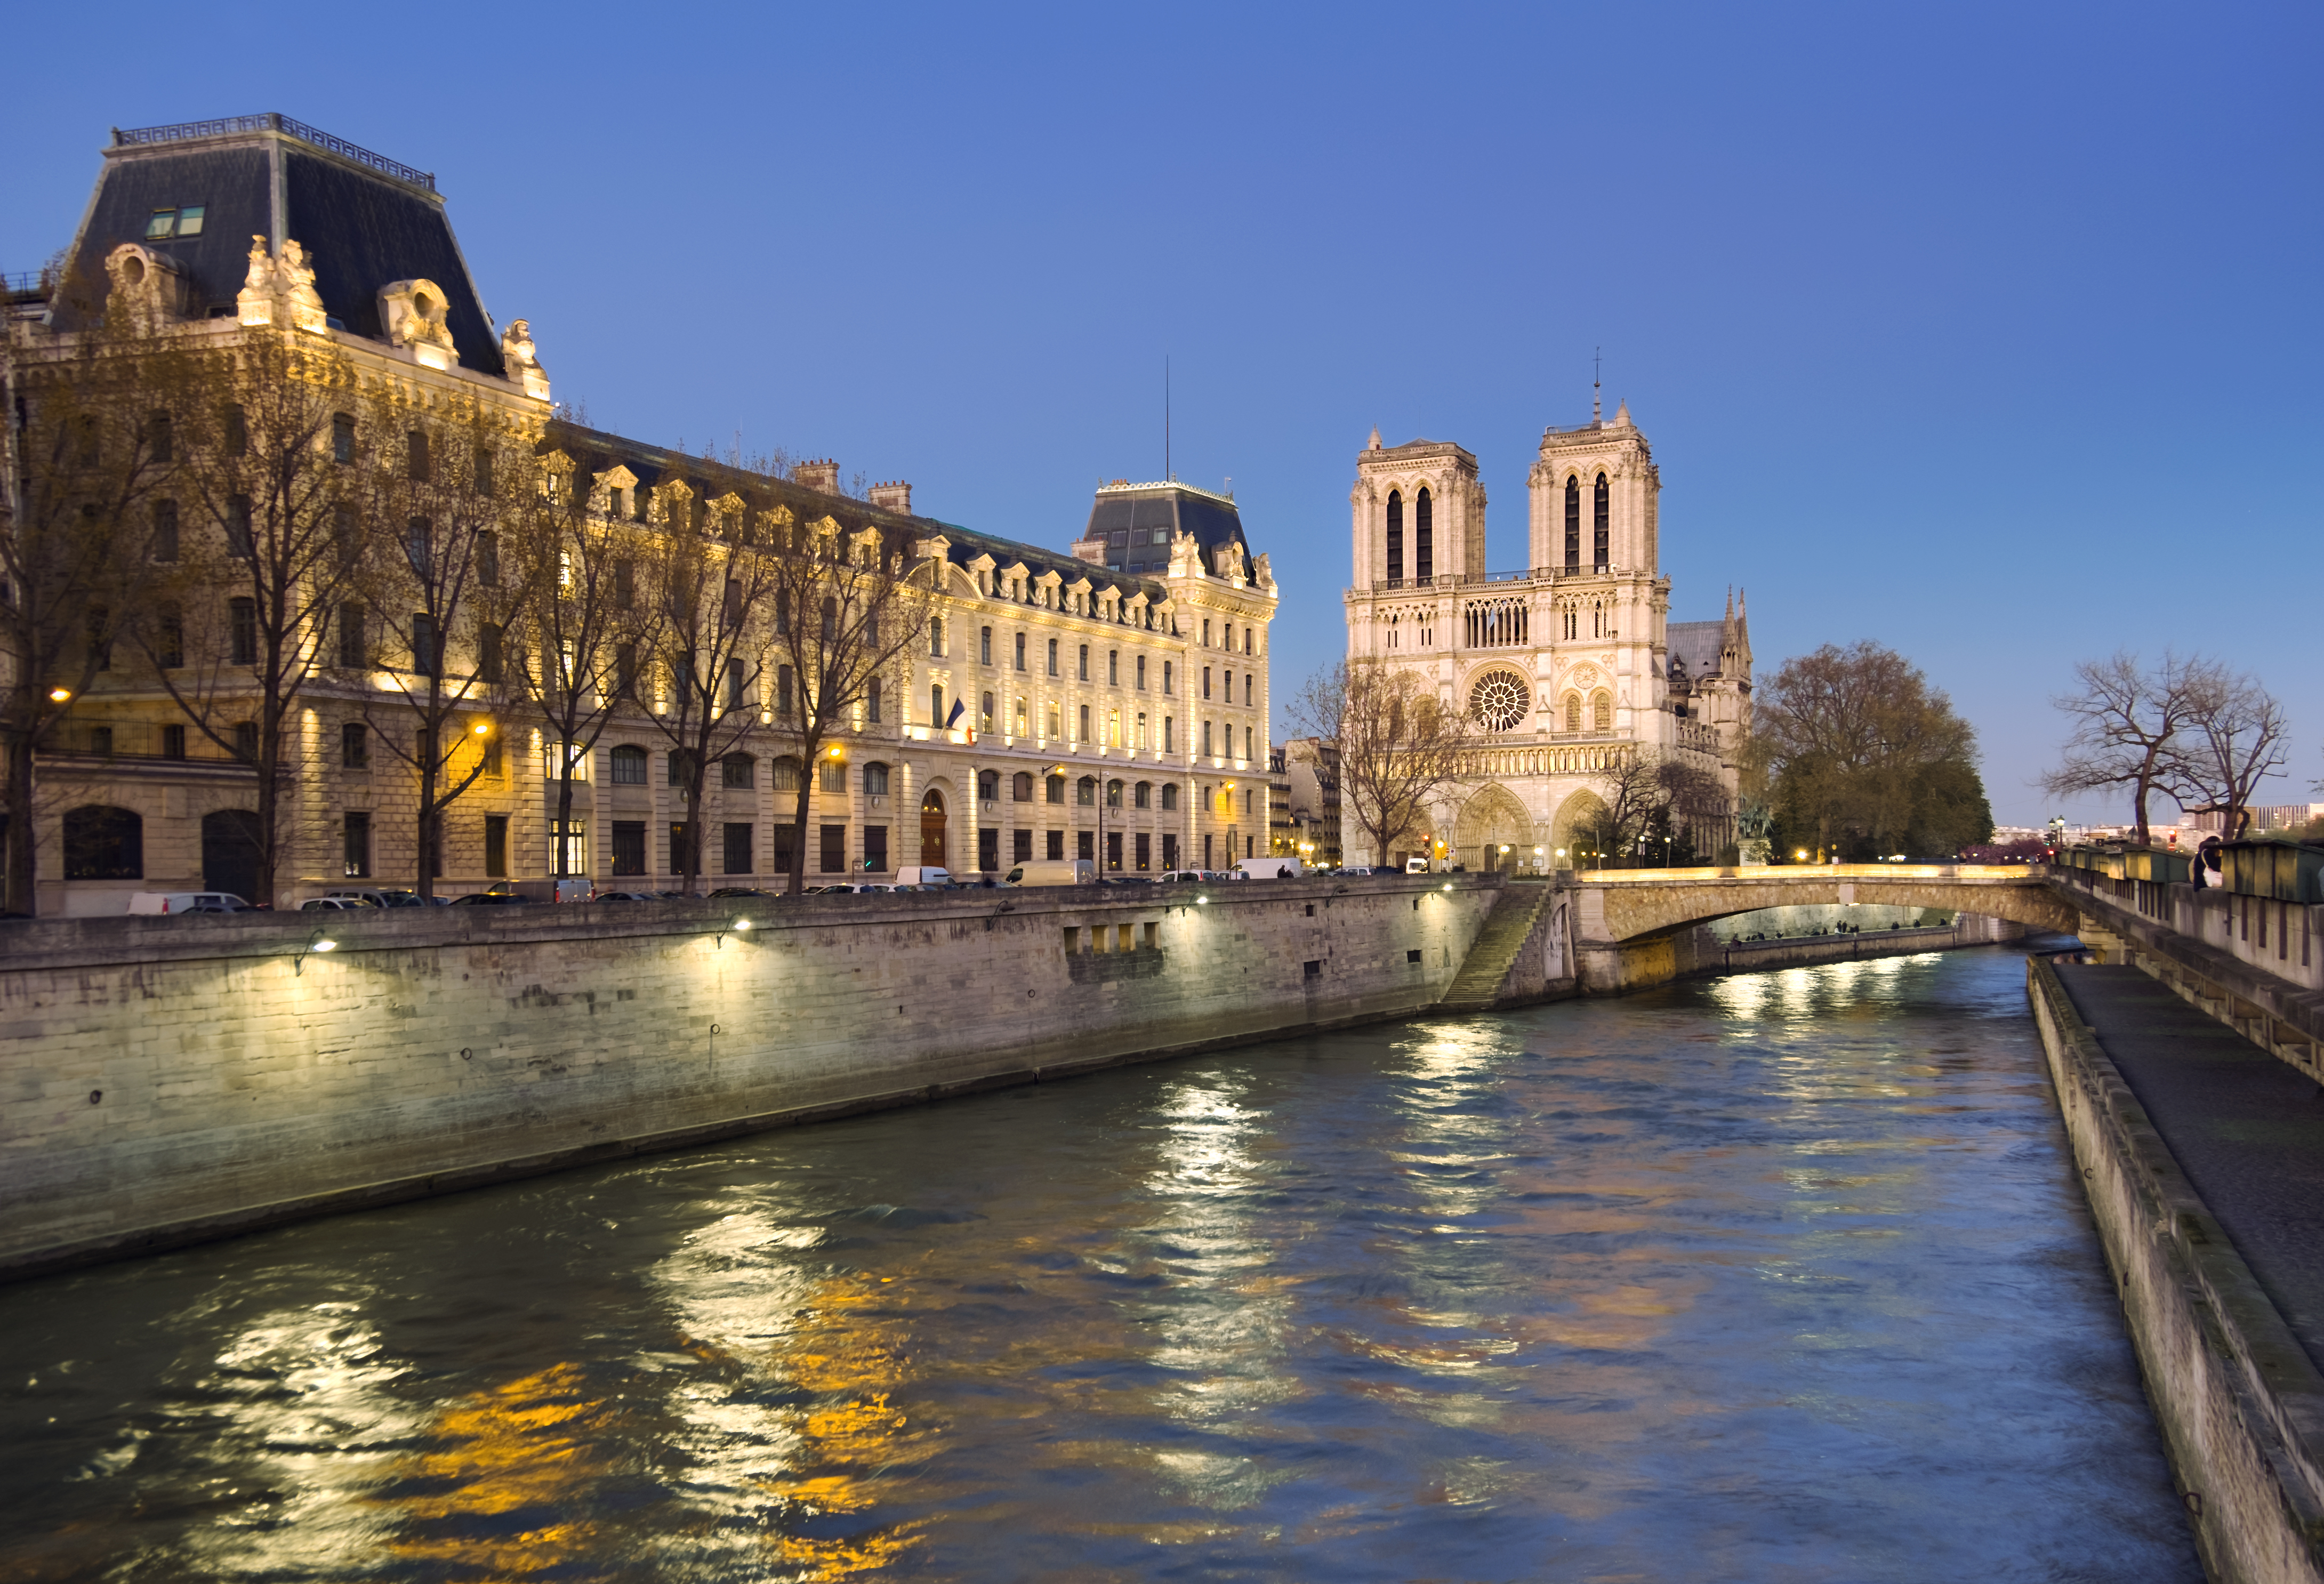 Seine river at night. Buildings along the shore.